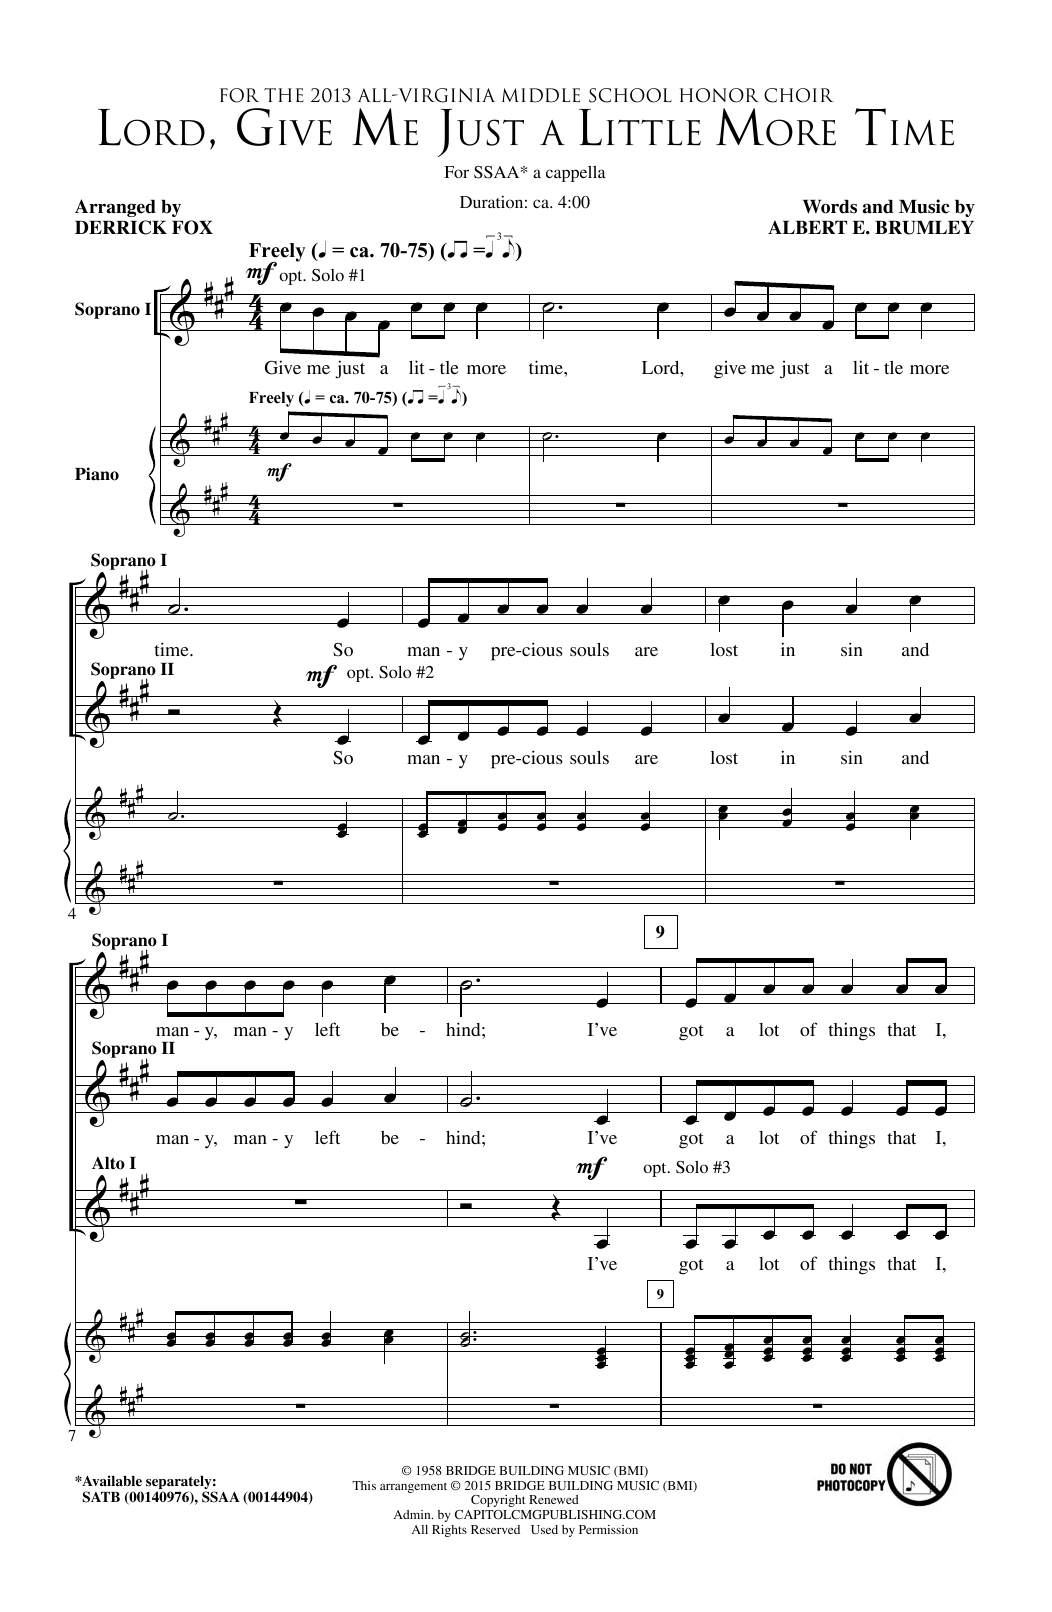 Download Derrick Fox Lord, Give Me Just A Little More Time Sheet Music